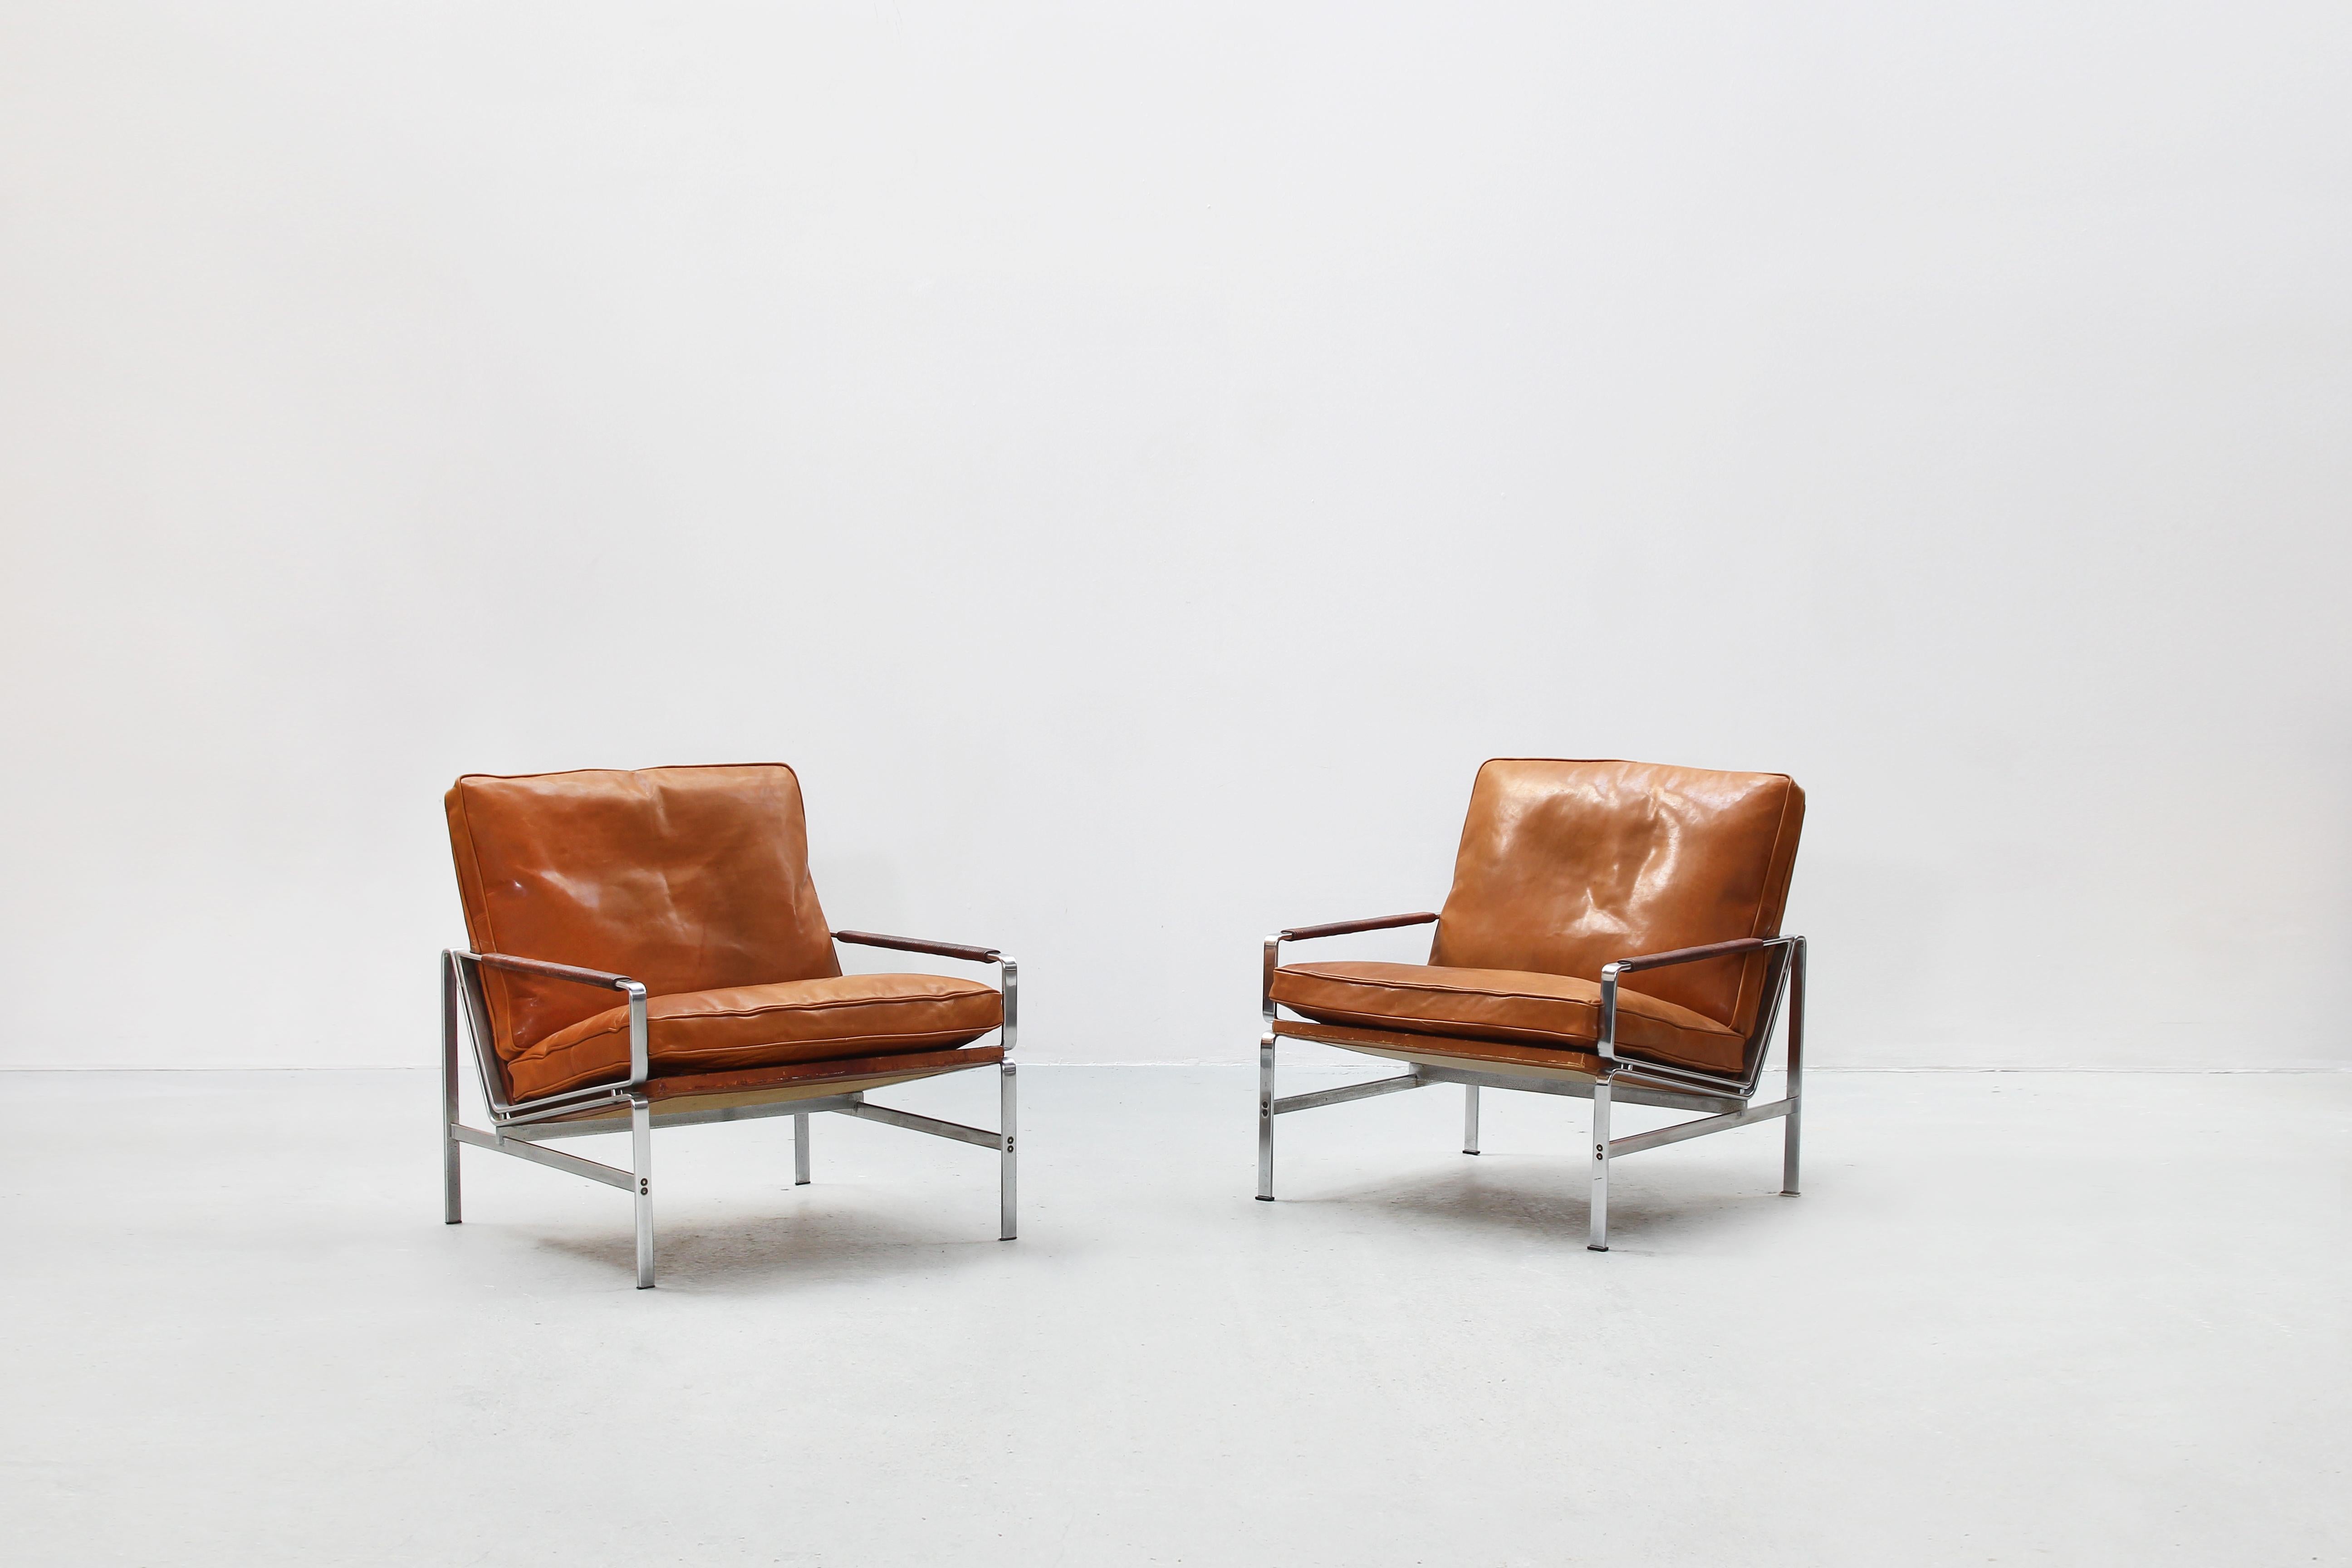 A beautiful pair of lounge chairs designed by Preben Fabricius & Jørgen Kastholm and produced by Alfred Kill International, Germany 1968. Both chairs are in a very good condition with just little traces of usage. The cushions were newly